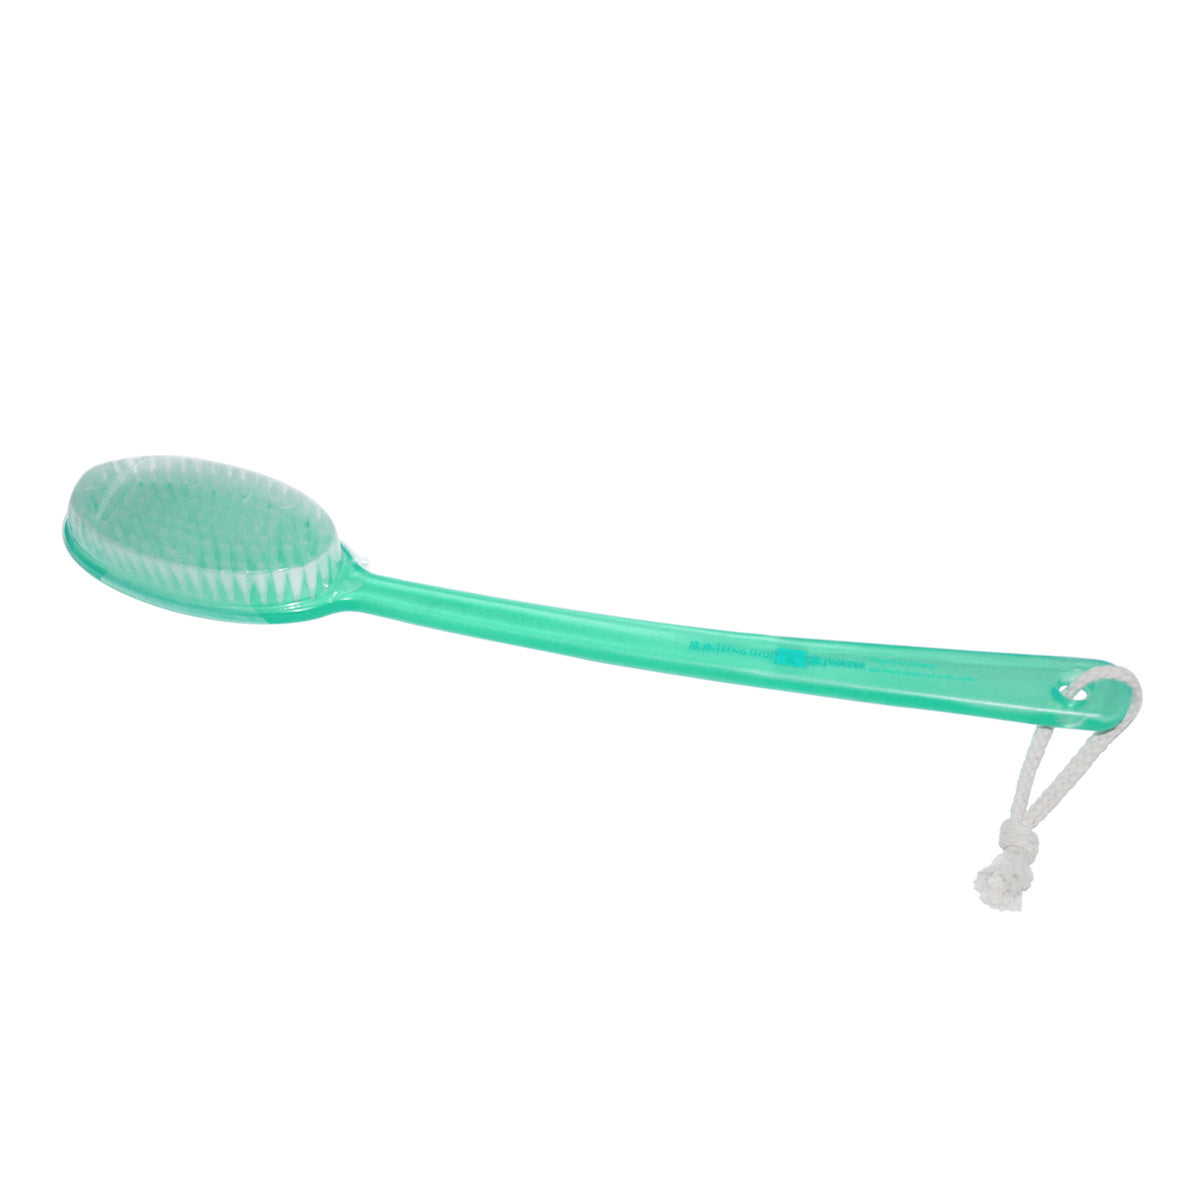 Primary image of Feng Shui (Frosted Green) Back Brush